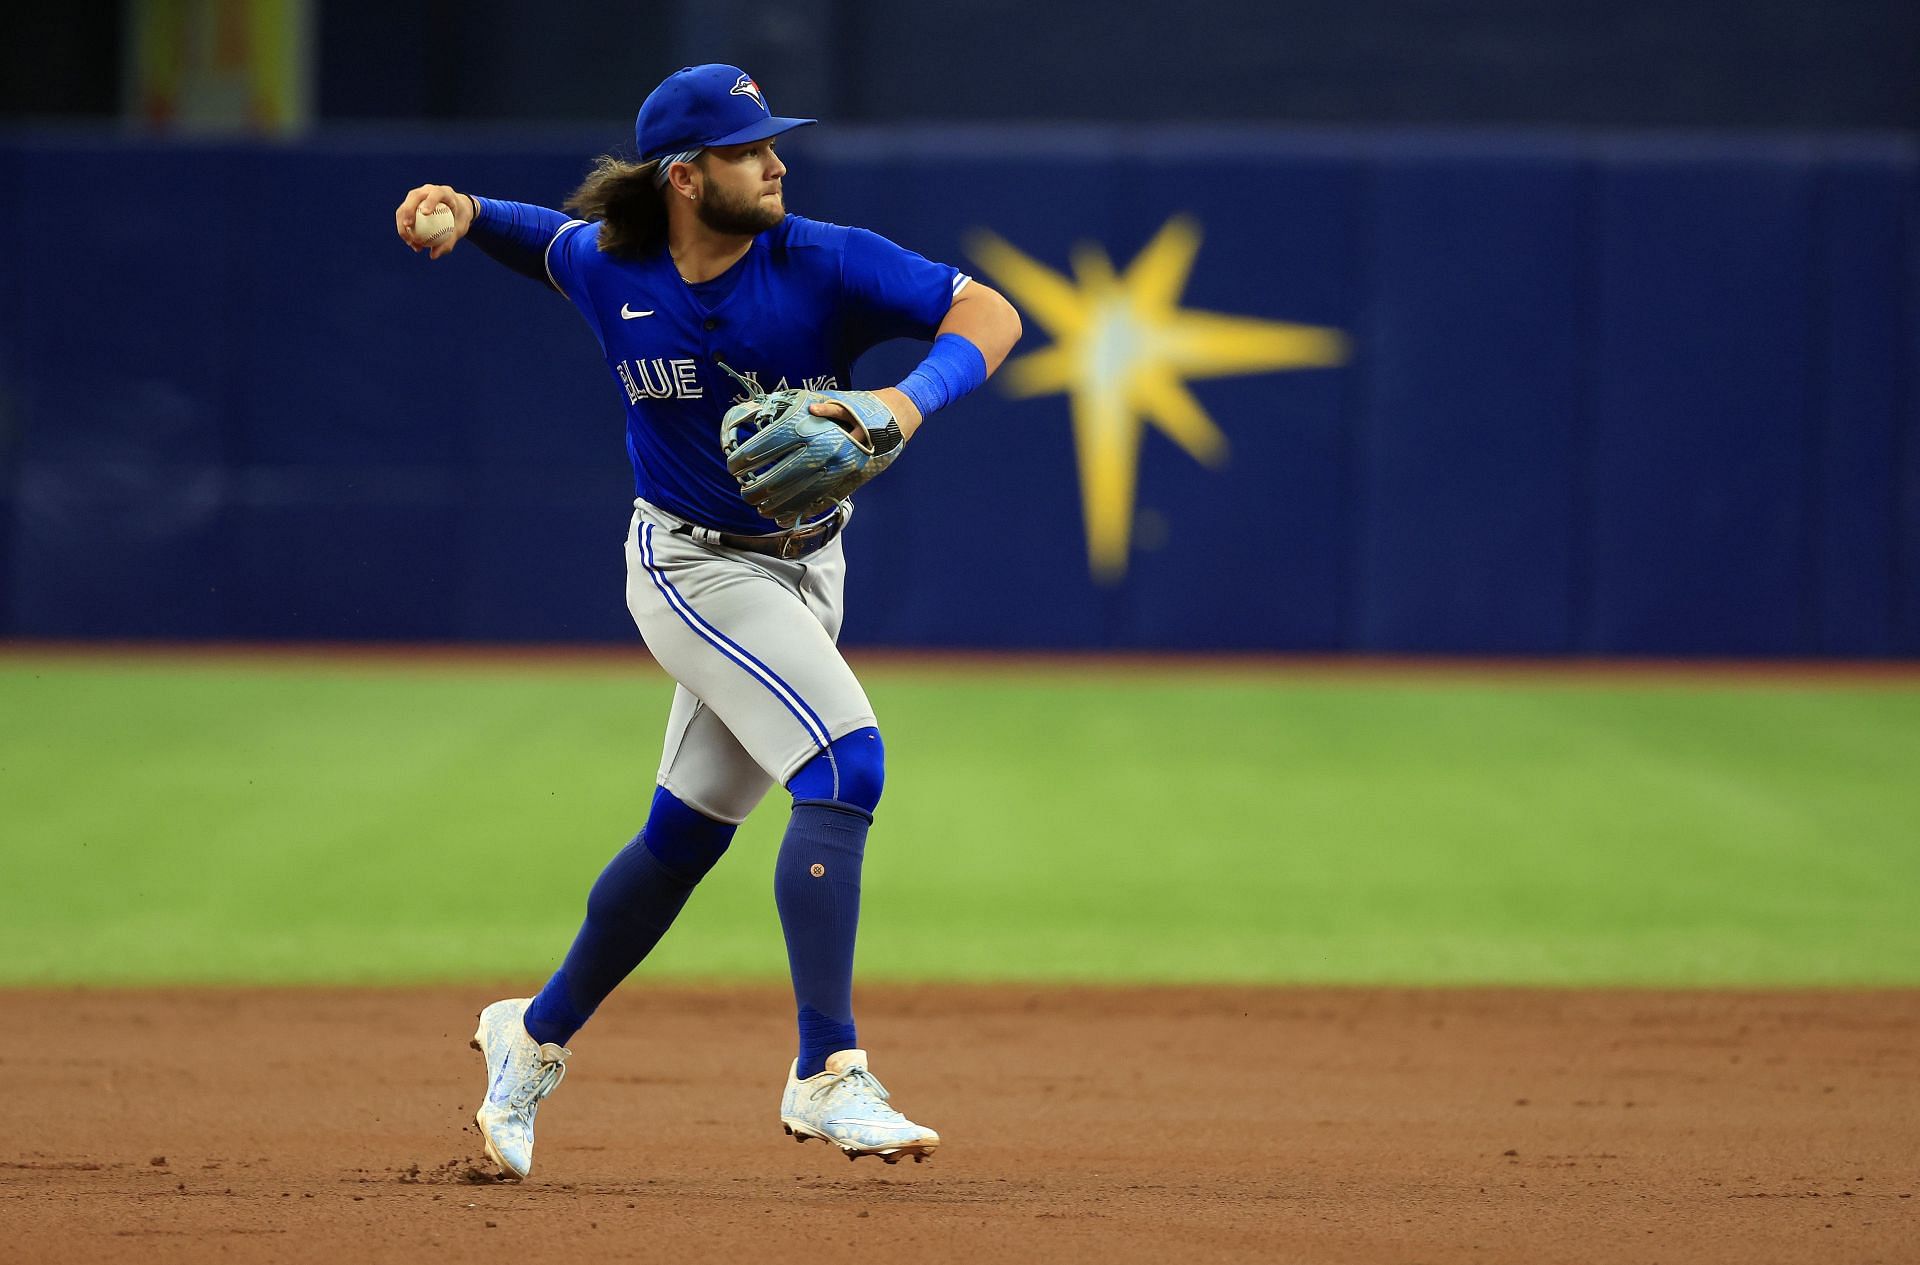 Bo Bichette of the Blue Jays in a game vs. the Tampa Bay Rays